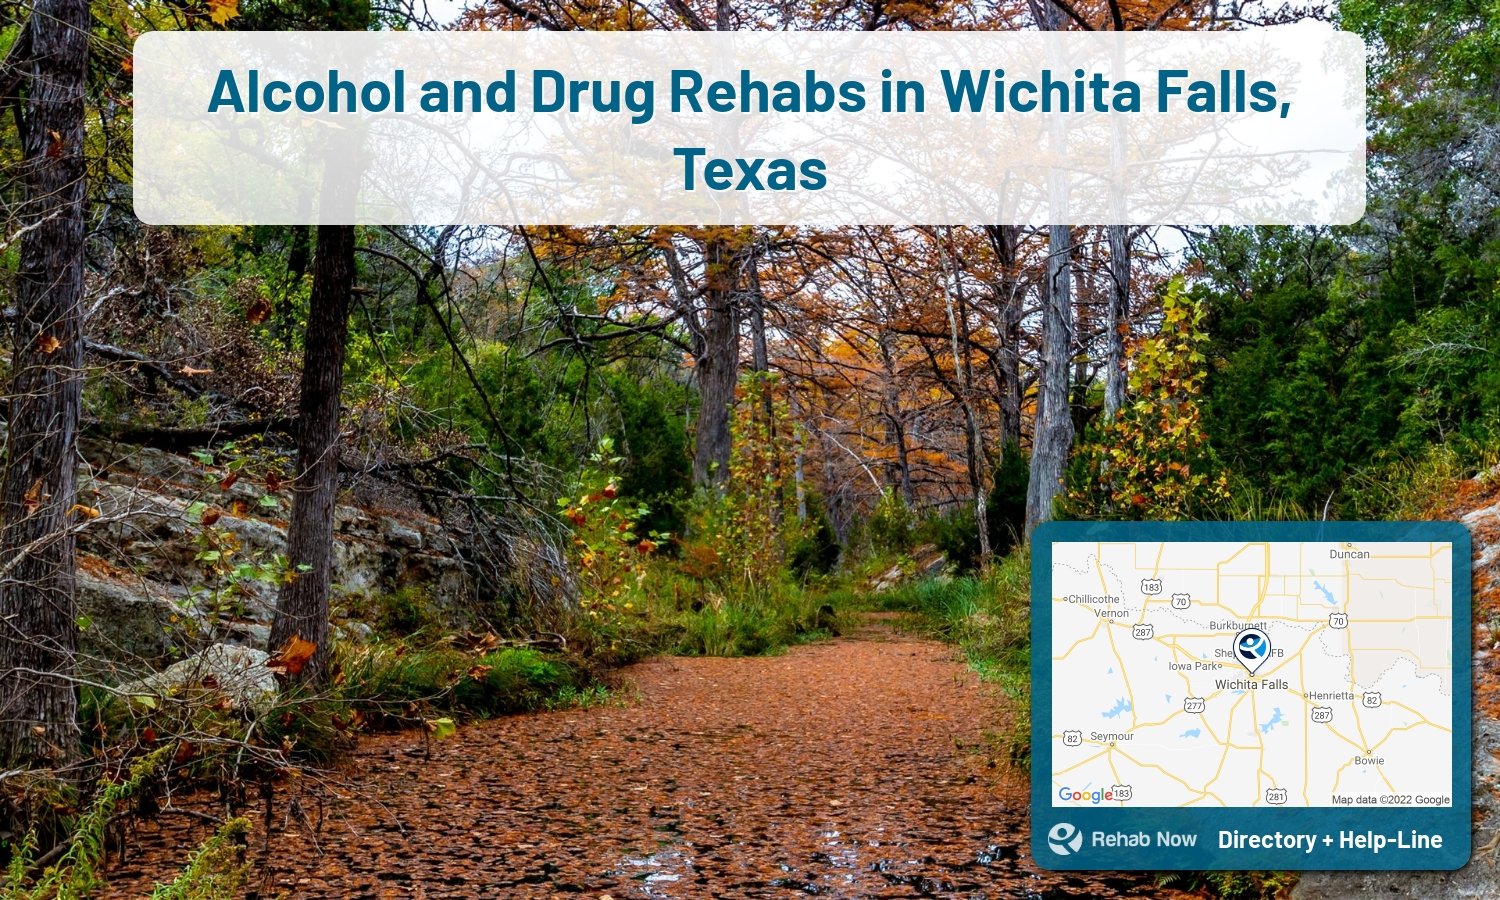 Ready to pick a rehab center in Wichita Falls? Get off alcohol, opiates, and other drugs, by selecting top drug rehab centers in Texas